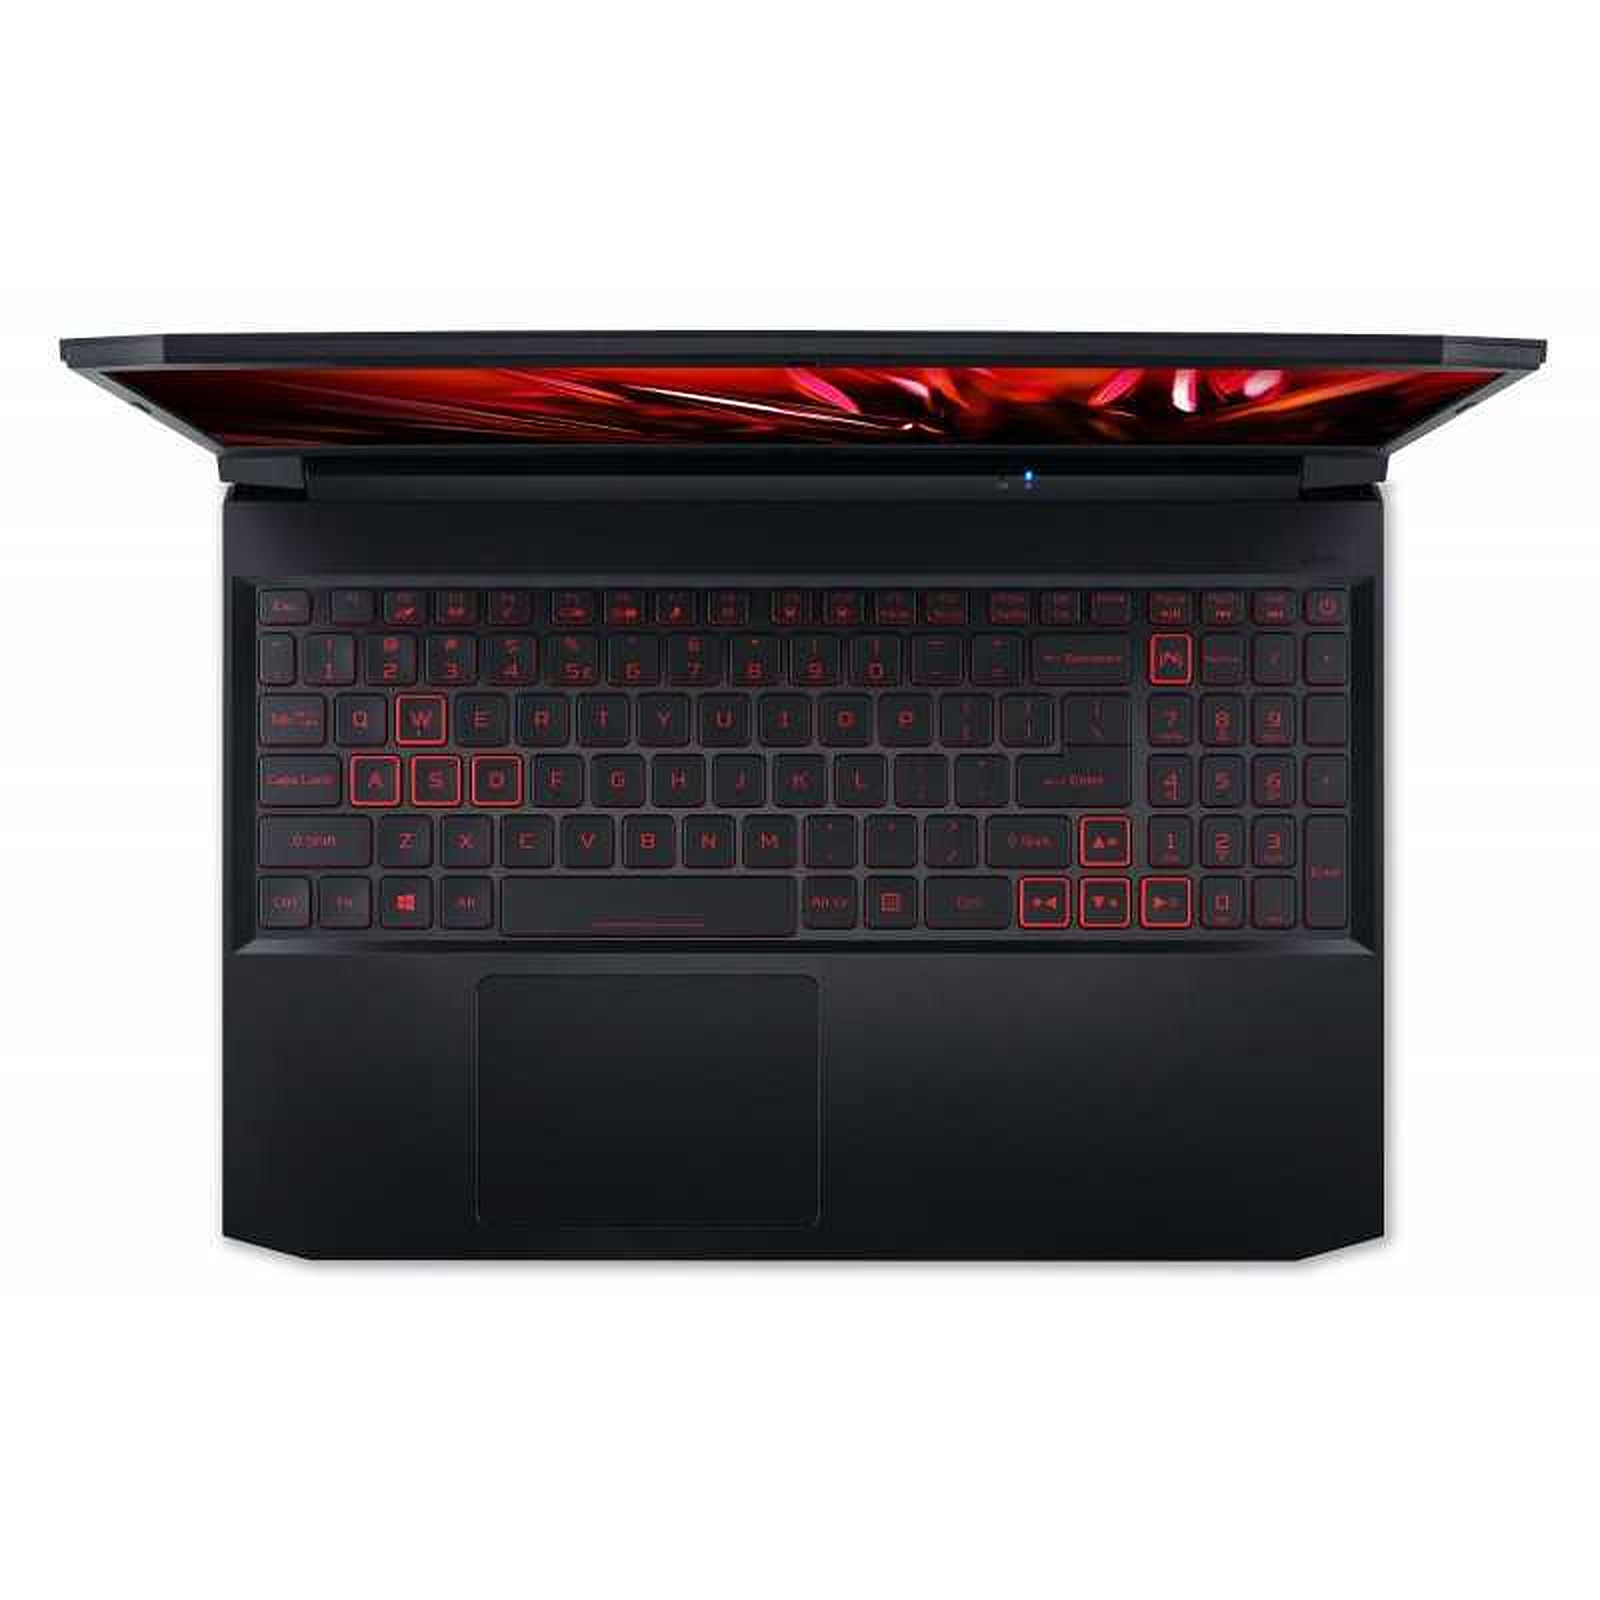 Acer NH.QEKEF.001 - PC portable Acer - grosbill-pro.com - 1